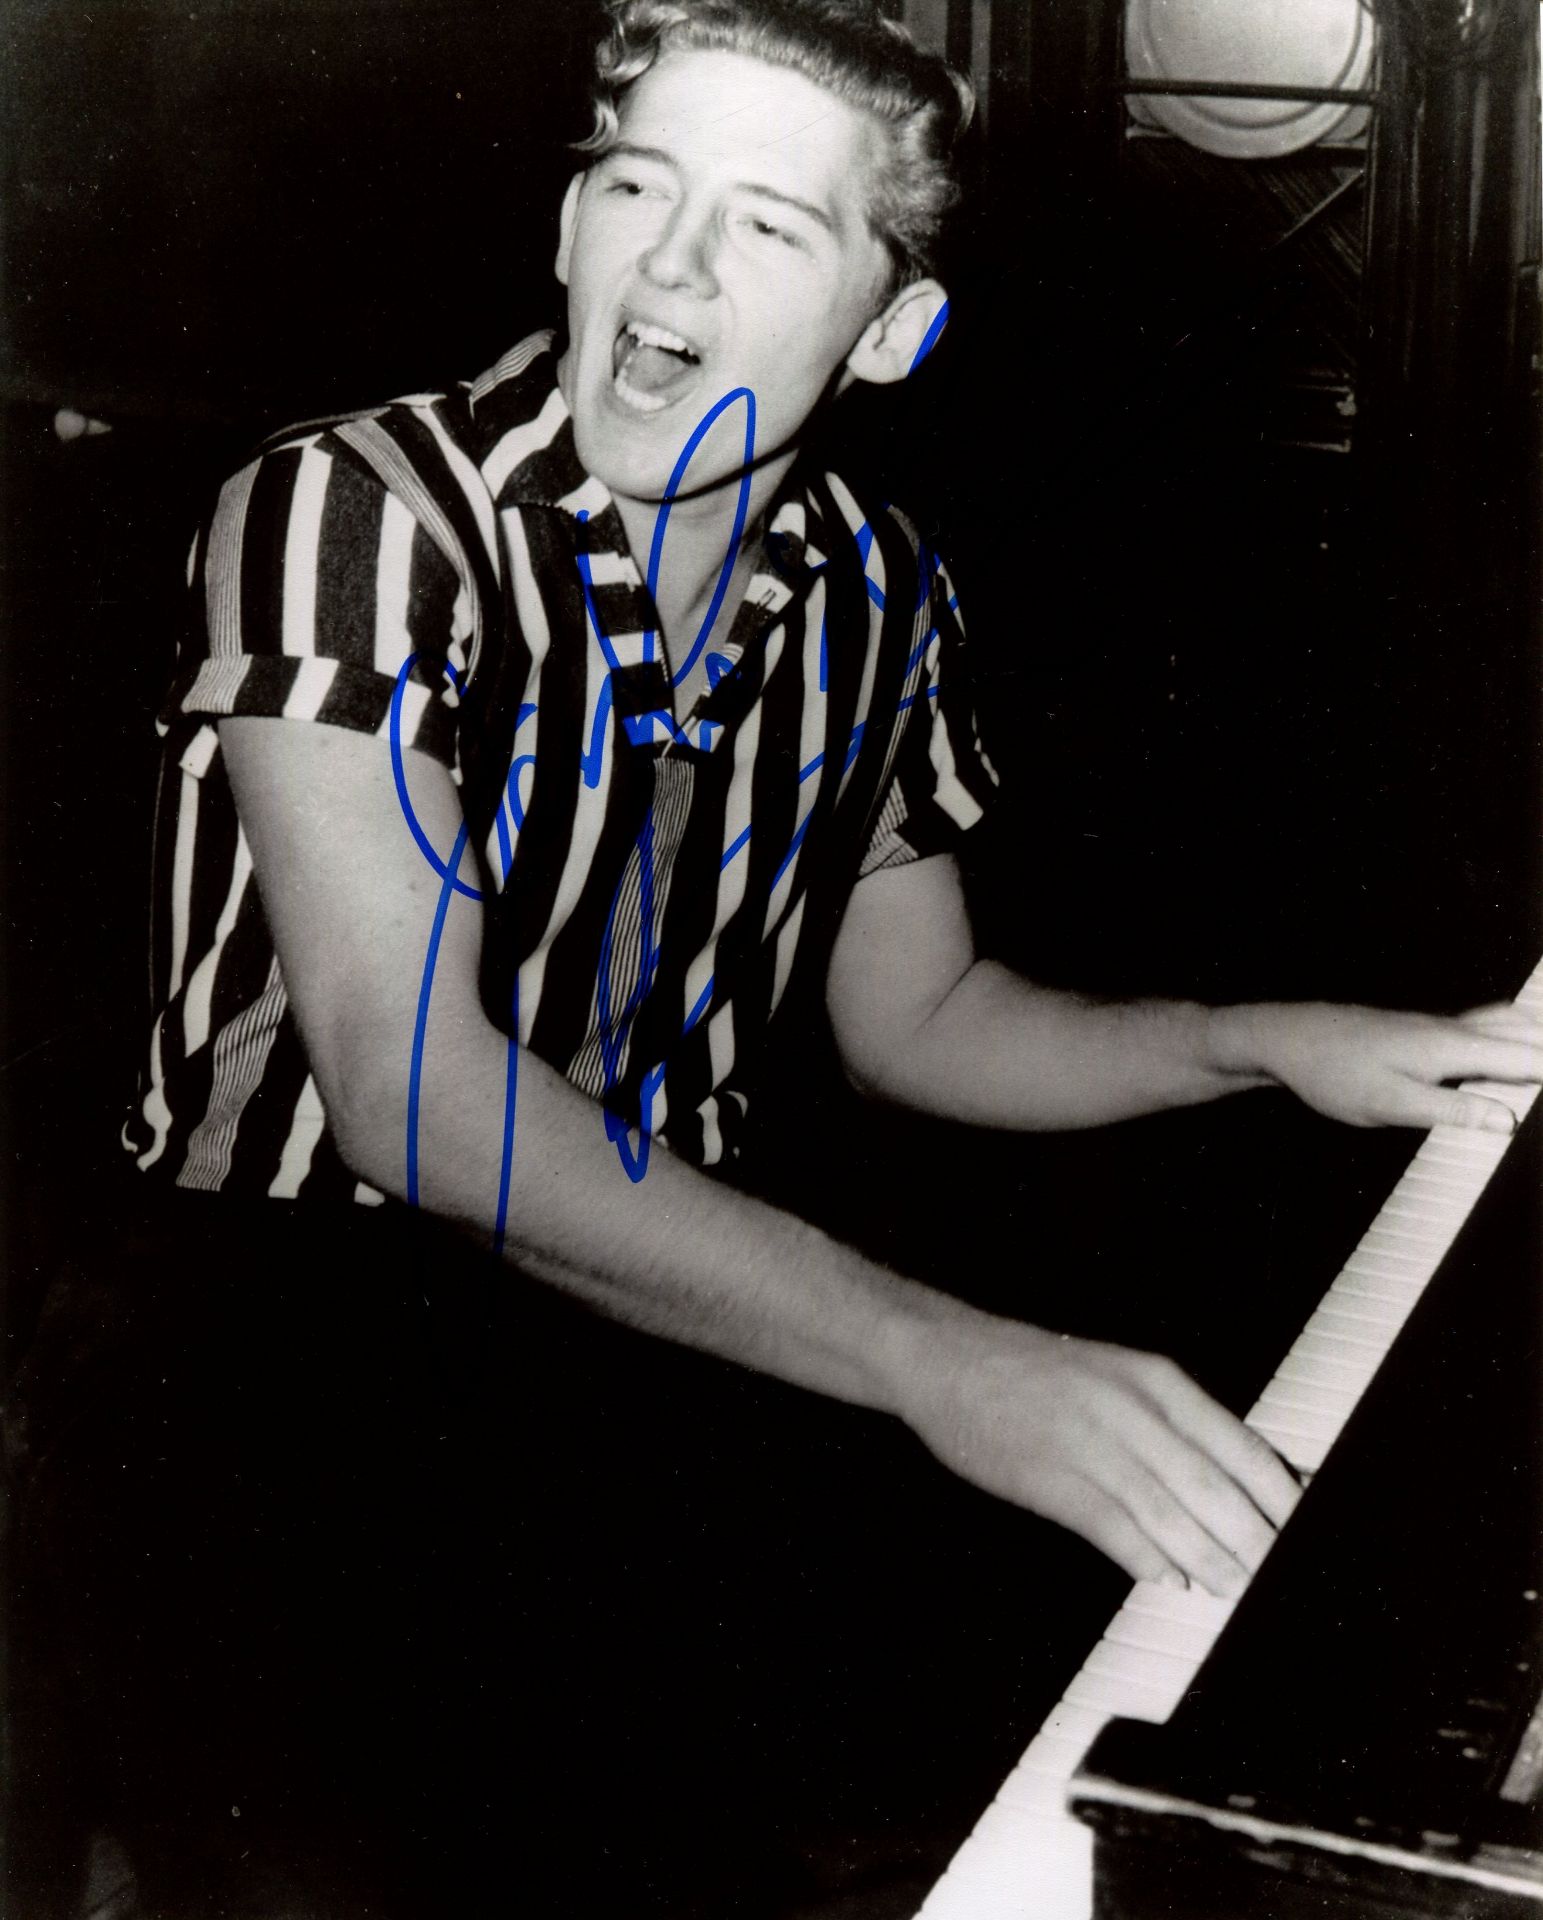 LEWIS JERRY LEE: (1935-2022) American rock 'n' roll singer. Signed 8 x 10 photograph of the youthful